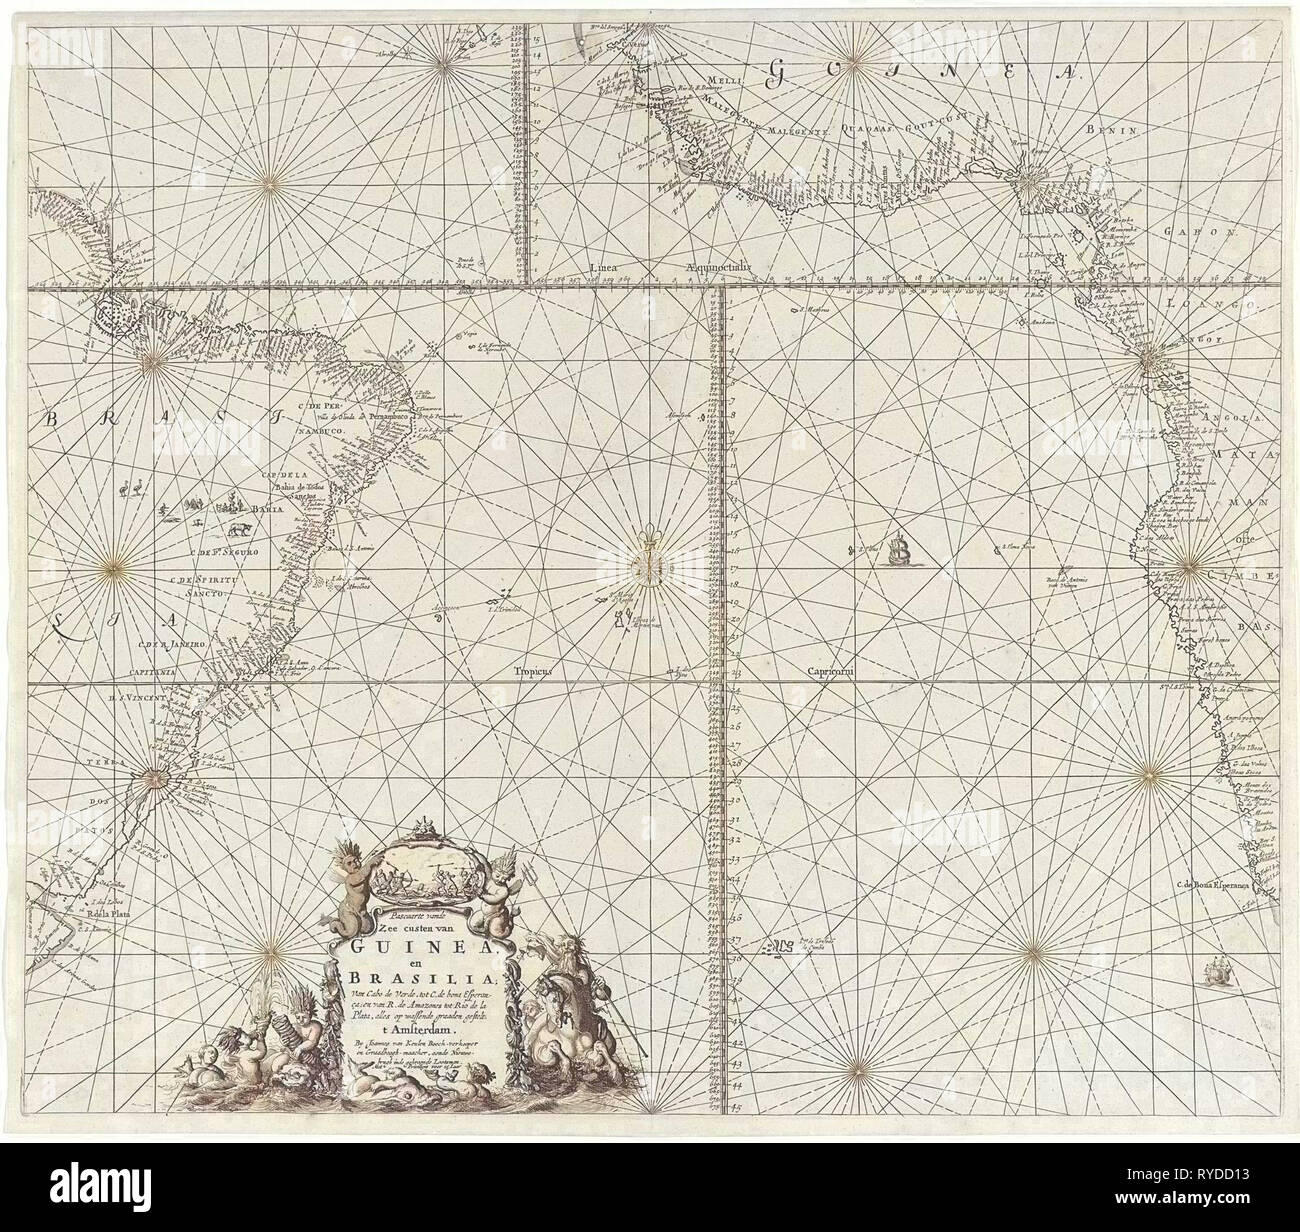 Sea chart of the southern part of the Atlantic coasts of Africa and Brazil, Jan Luyken, Johannes van Keulen (I), unknown, 1683 - 1799 Stock Photo